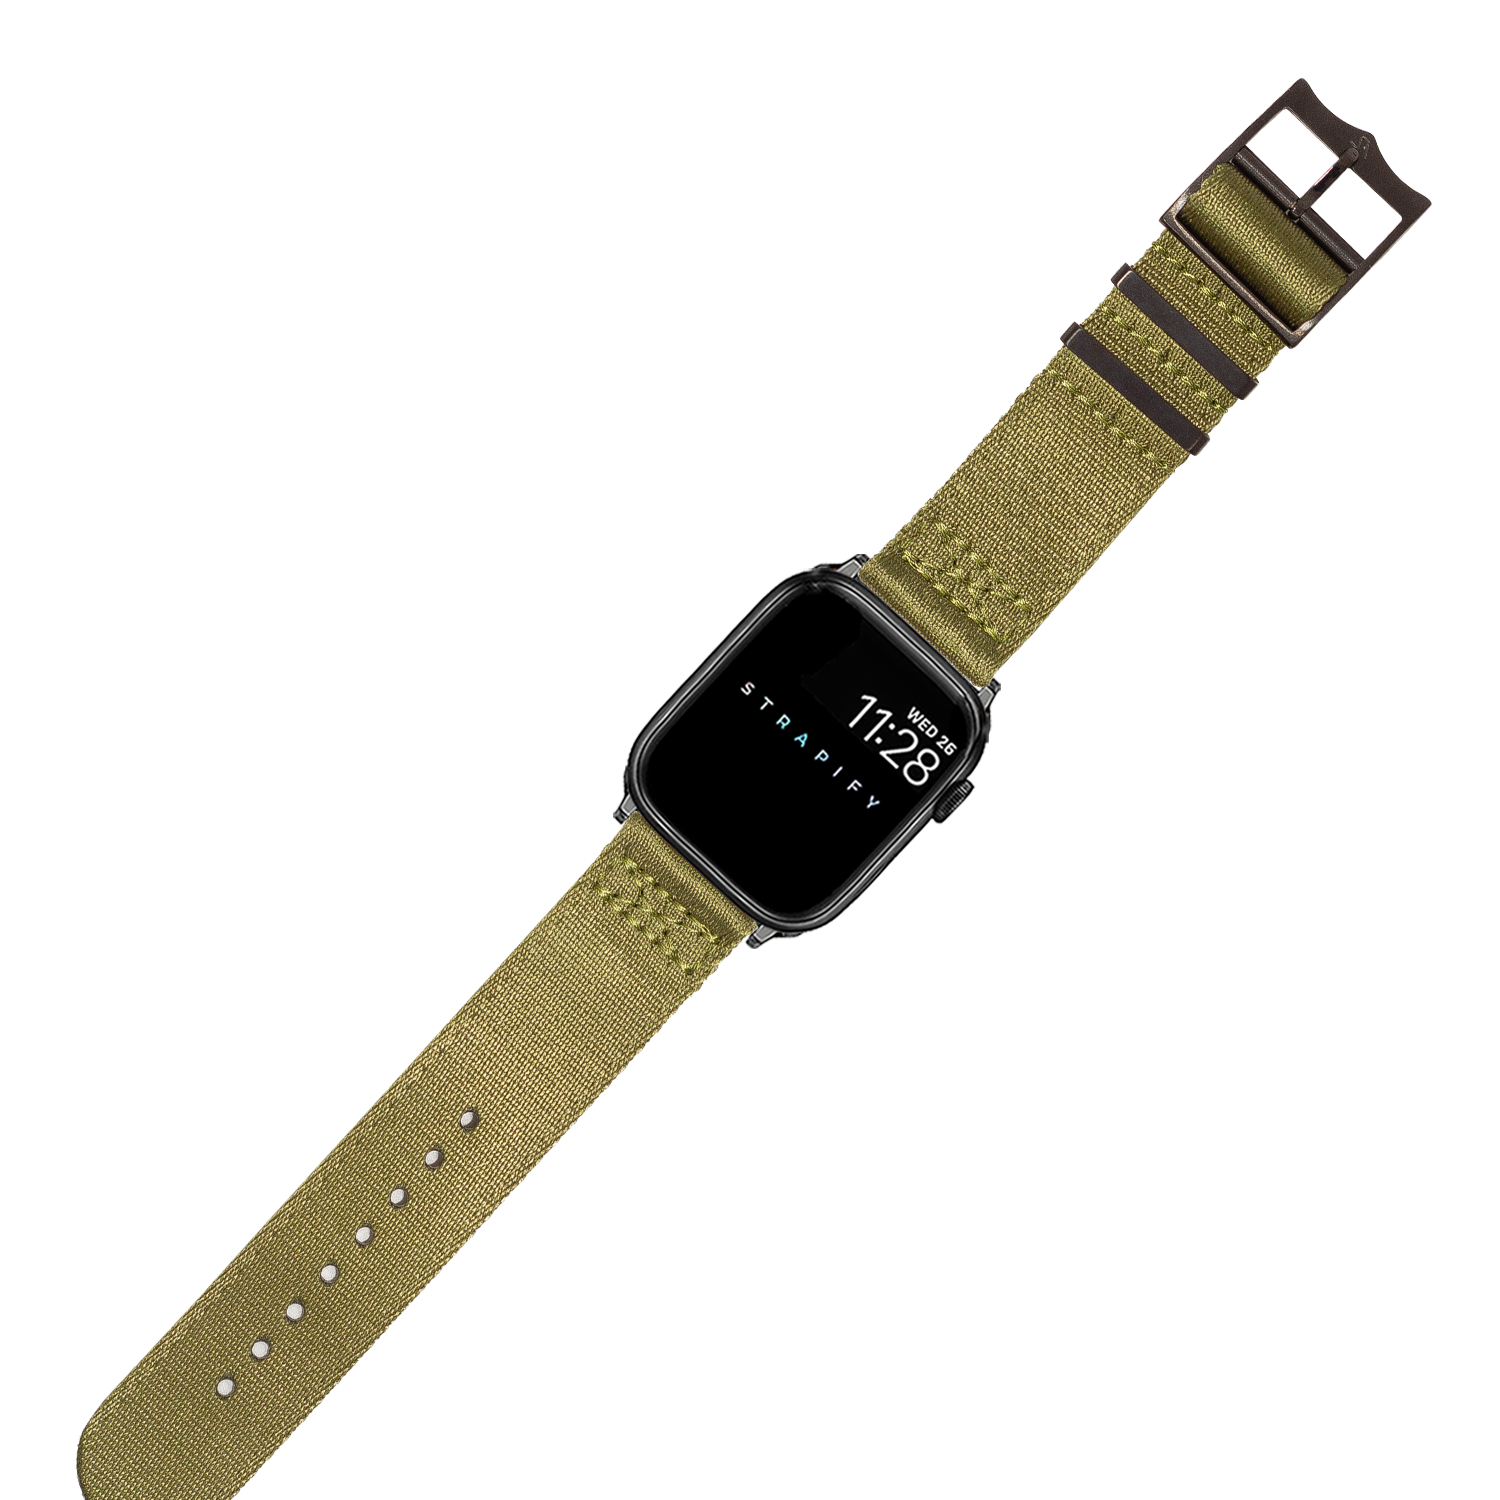 [Apple Watch] Ultra Militex - Army Green [Rose Gold Hardware]